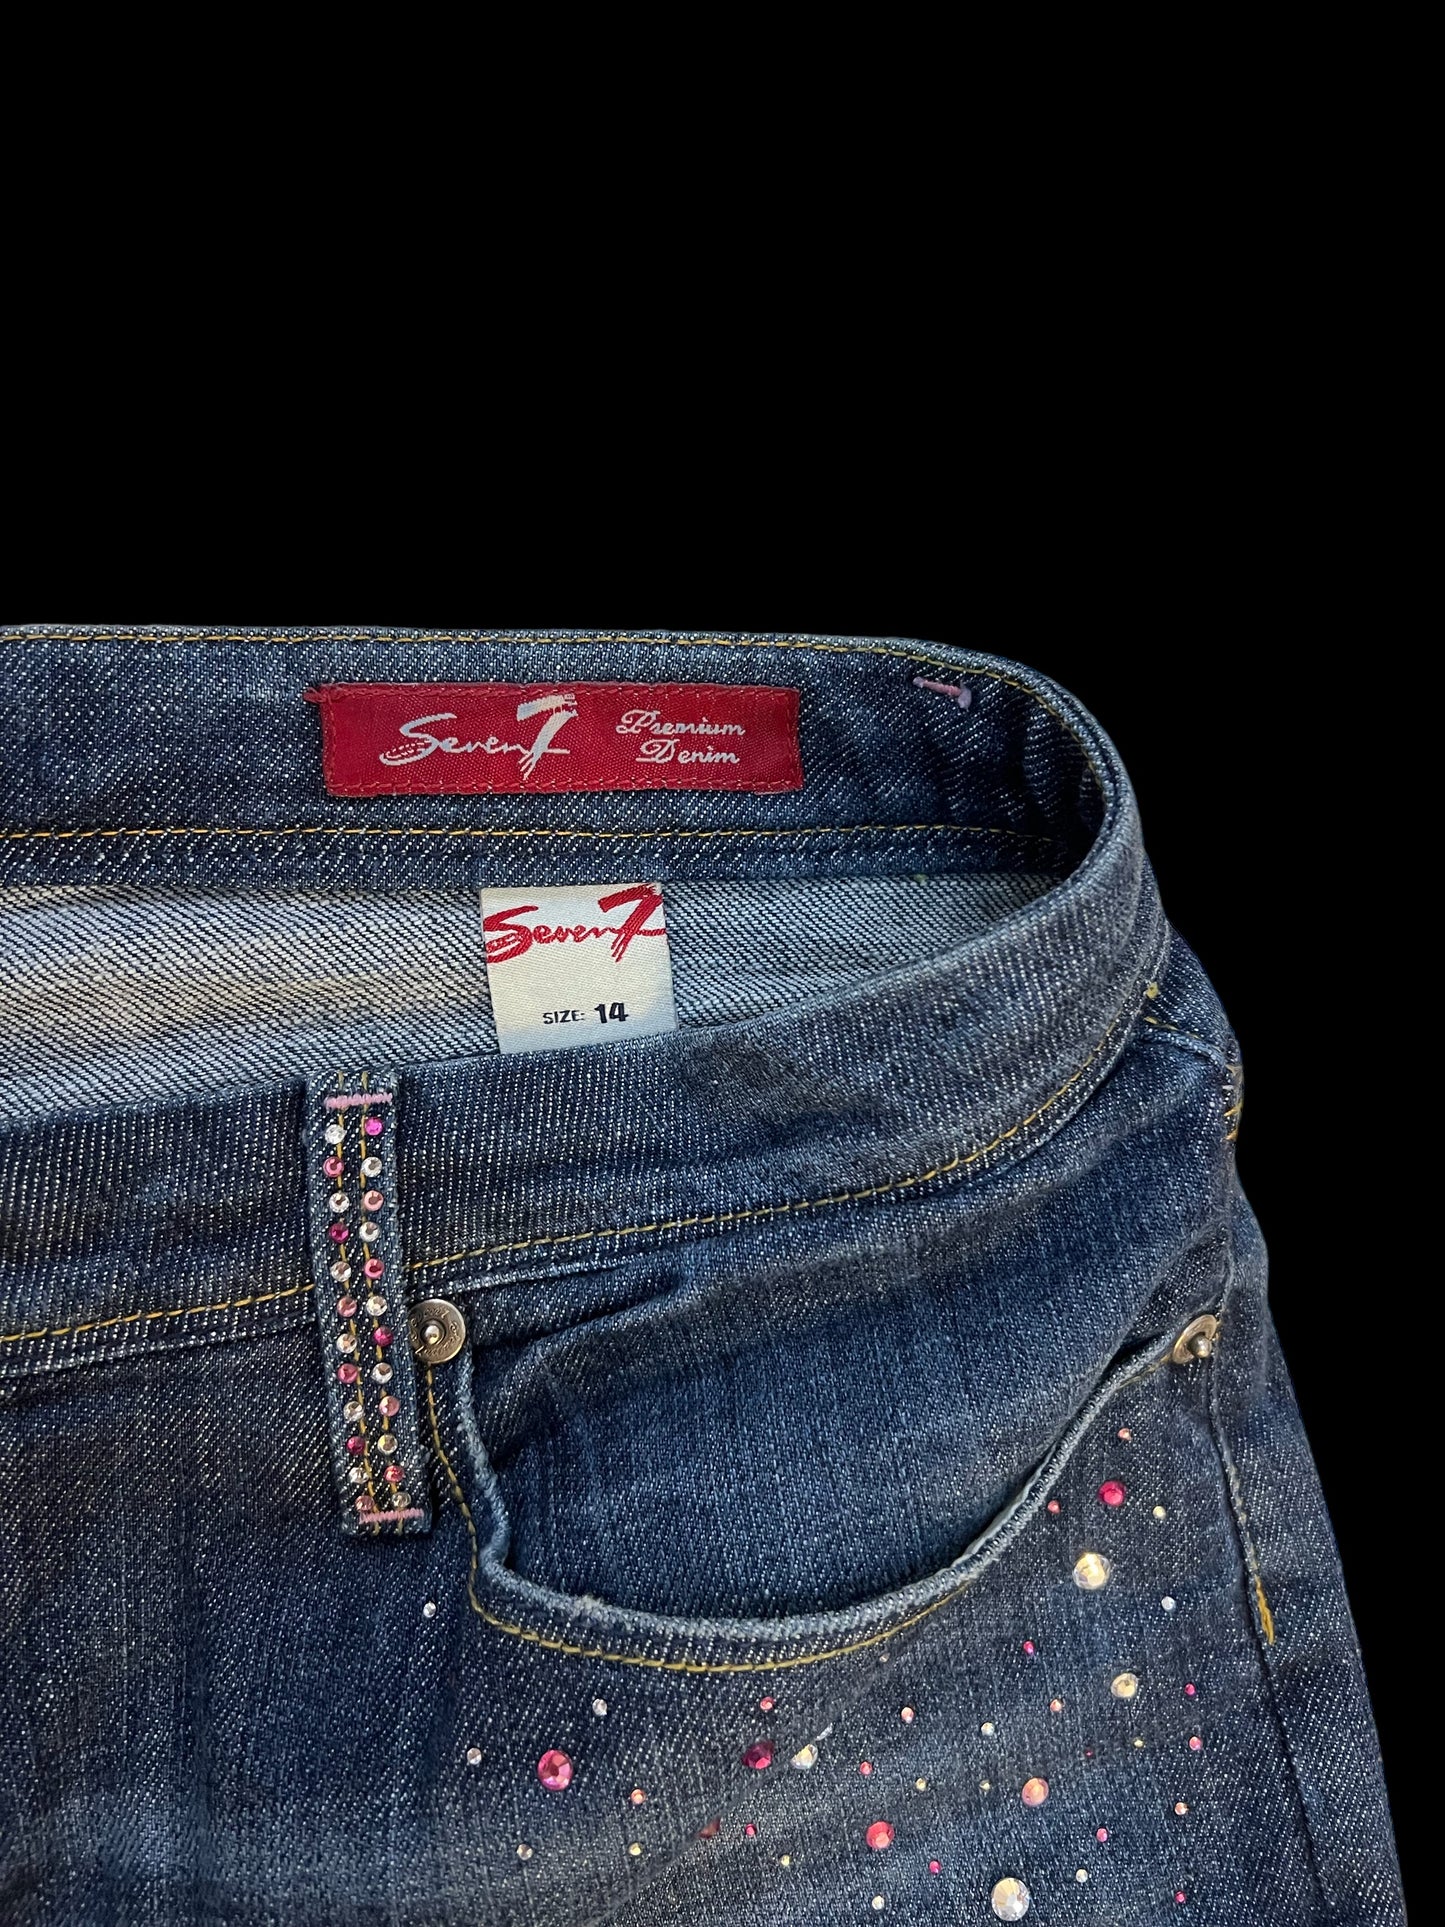 Bedazzled jeans